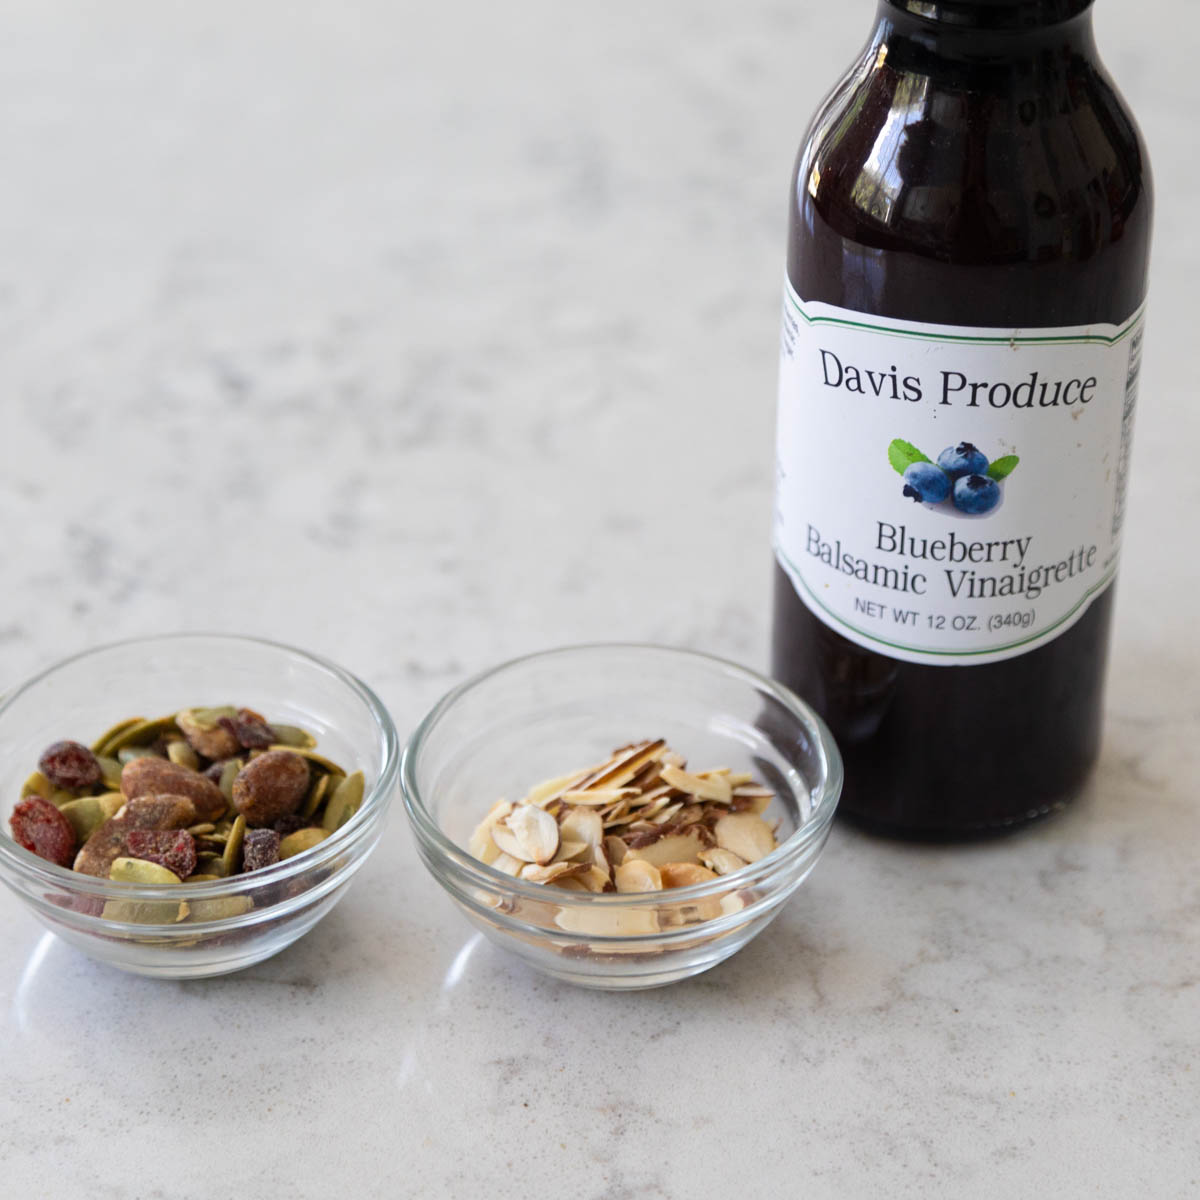 A bottle of blueberry vinaigrette sits next to a bowl of toasted almonds and a bowl of seasoned almonds with dried cranberries.